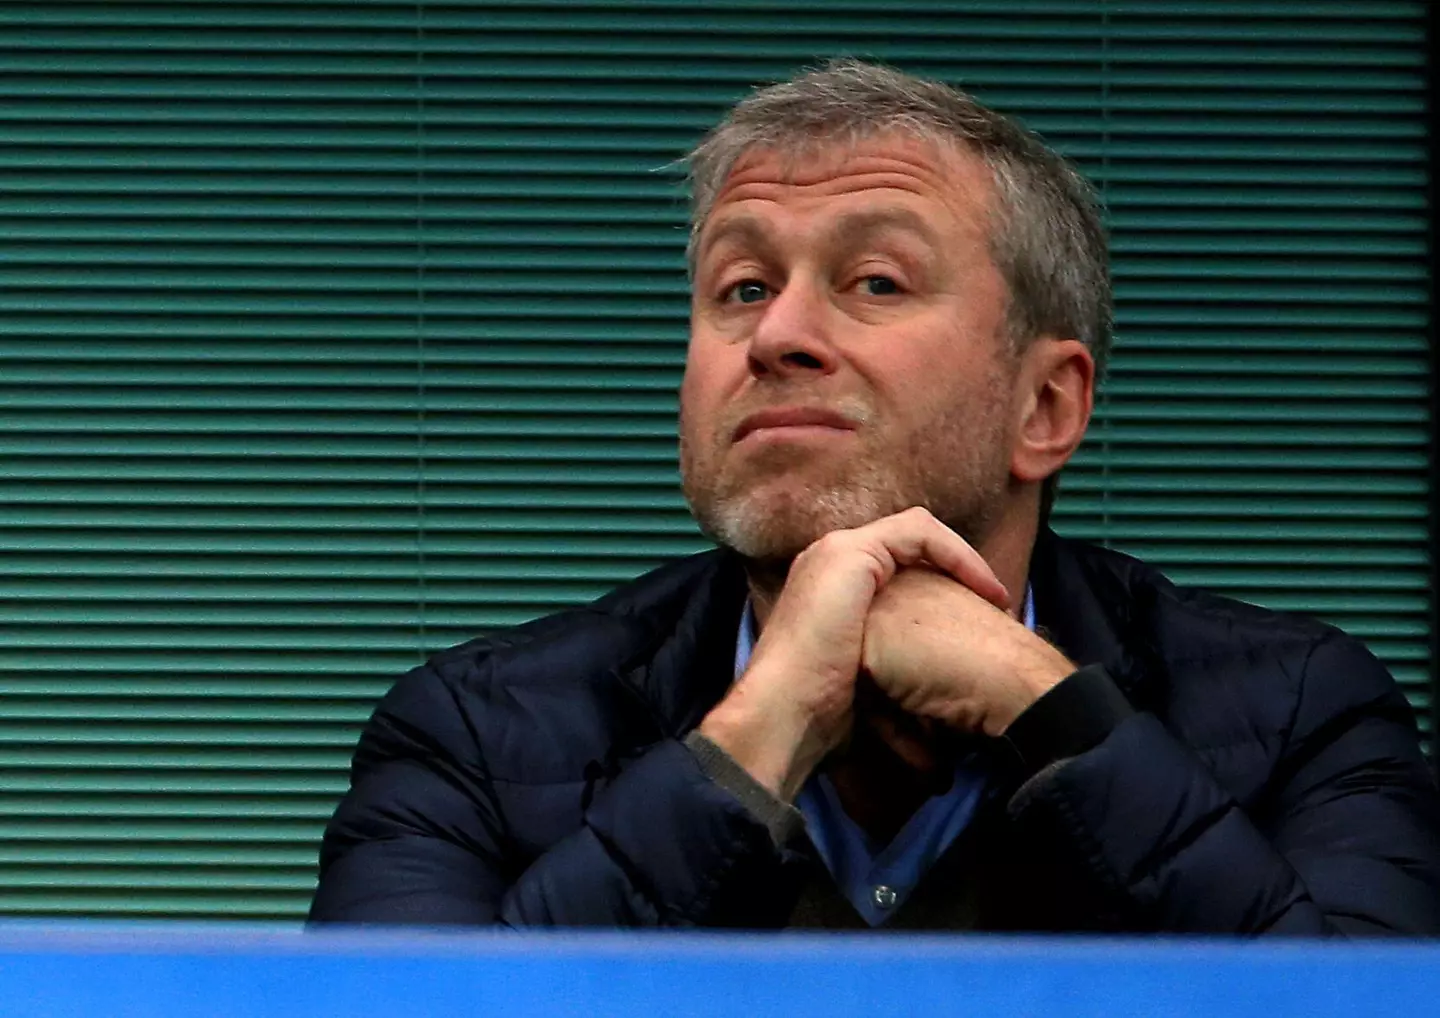 Roman Abramovich fell ill following a suspected poisoning earlier this month.